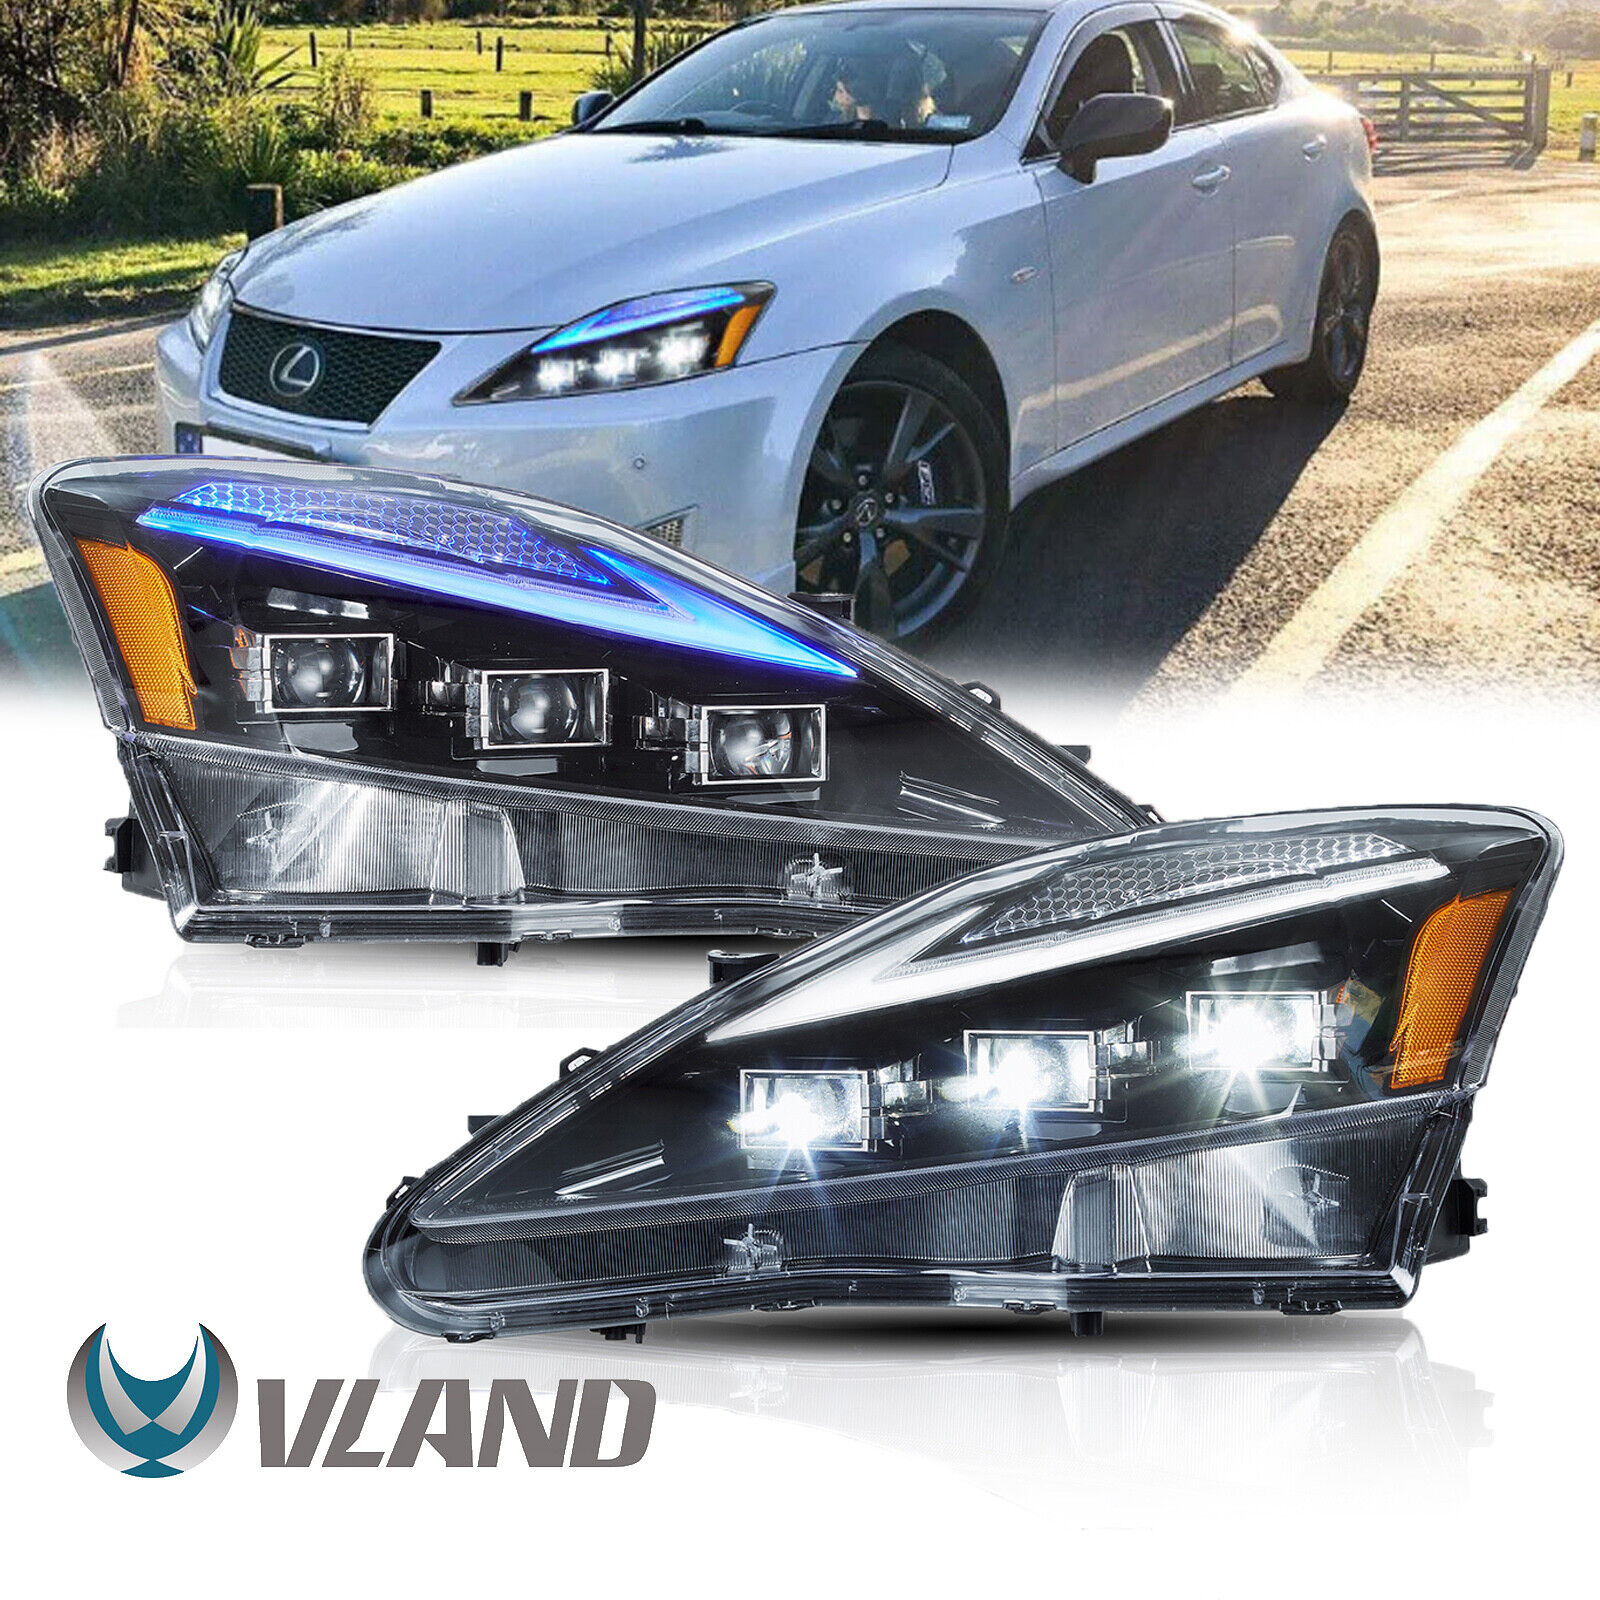 VLAND Headlights Projector LED DRL For 2006-2013 Lexus IS250 IS350 ISF W/Startup